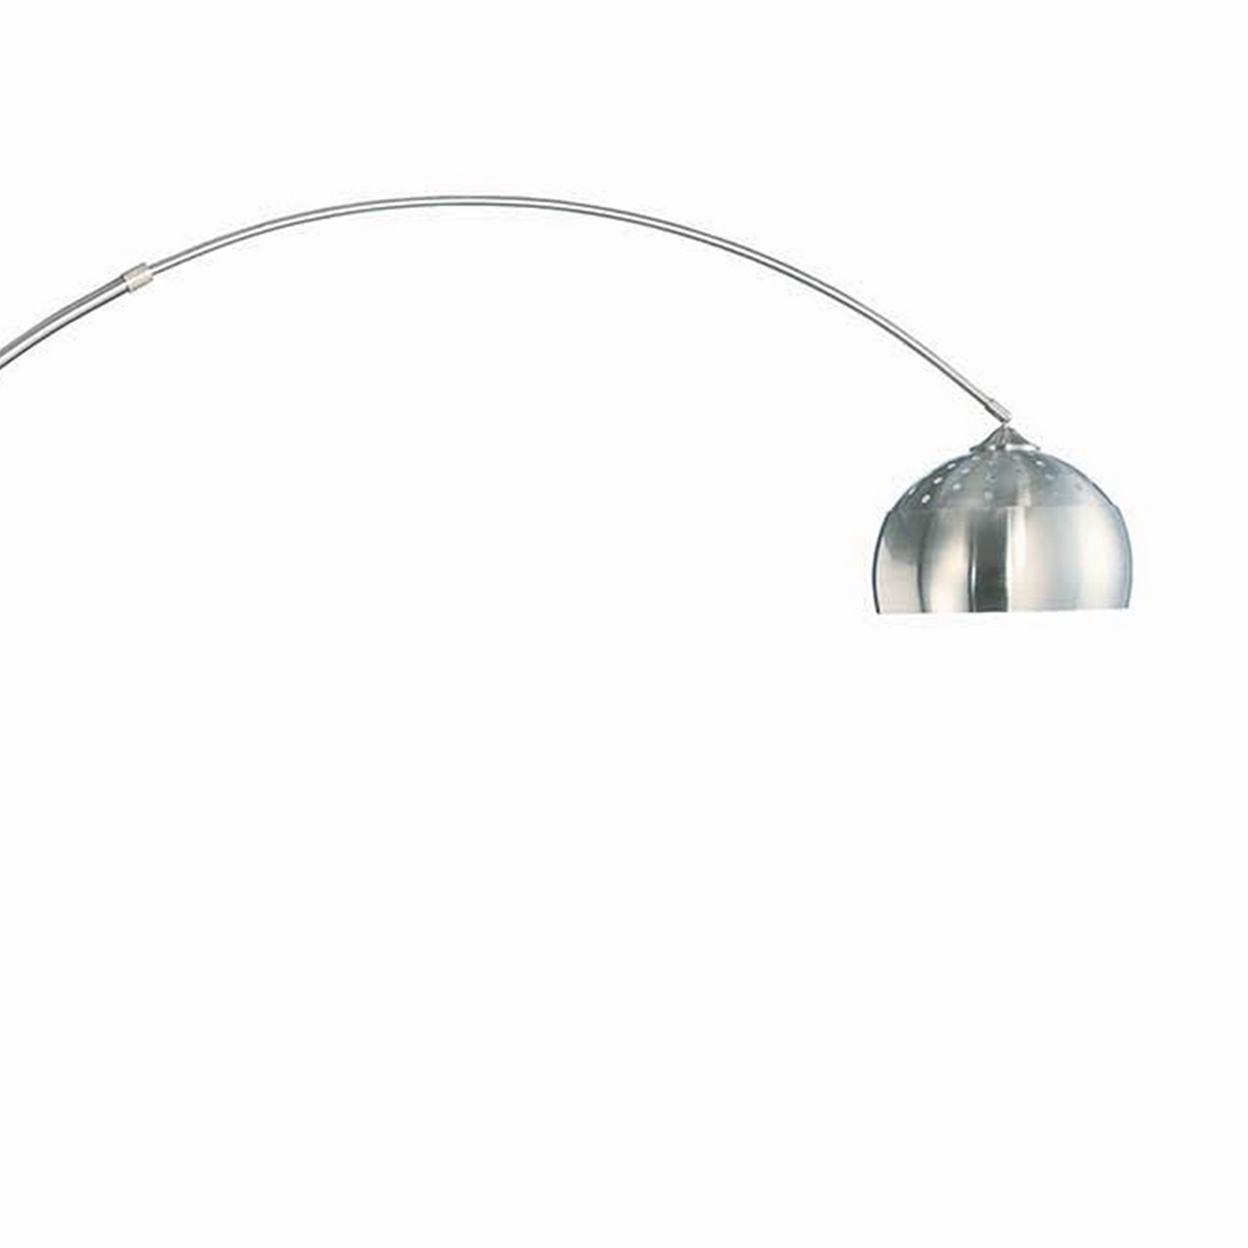 85 Inch Floor Lamp With Arched Body, Binary Switch, Marble Base, Silver- Saltoro Sherpi